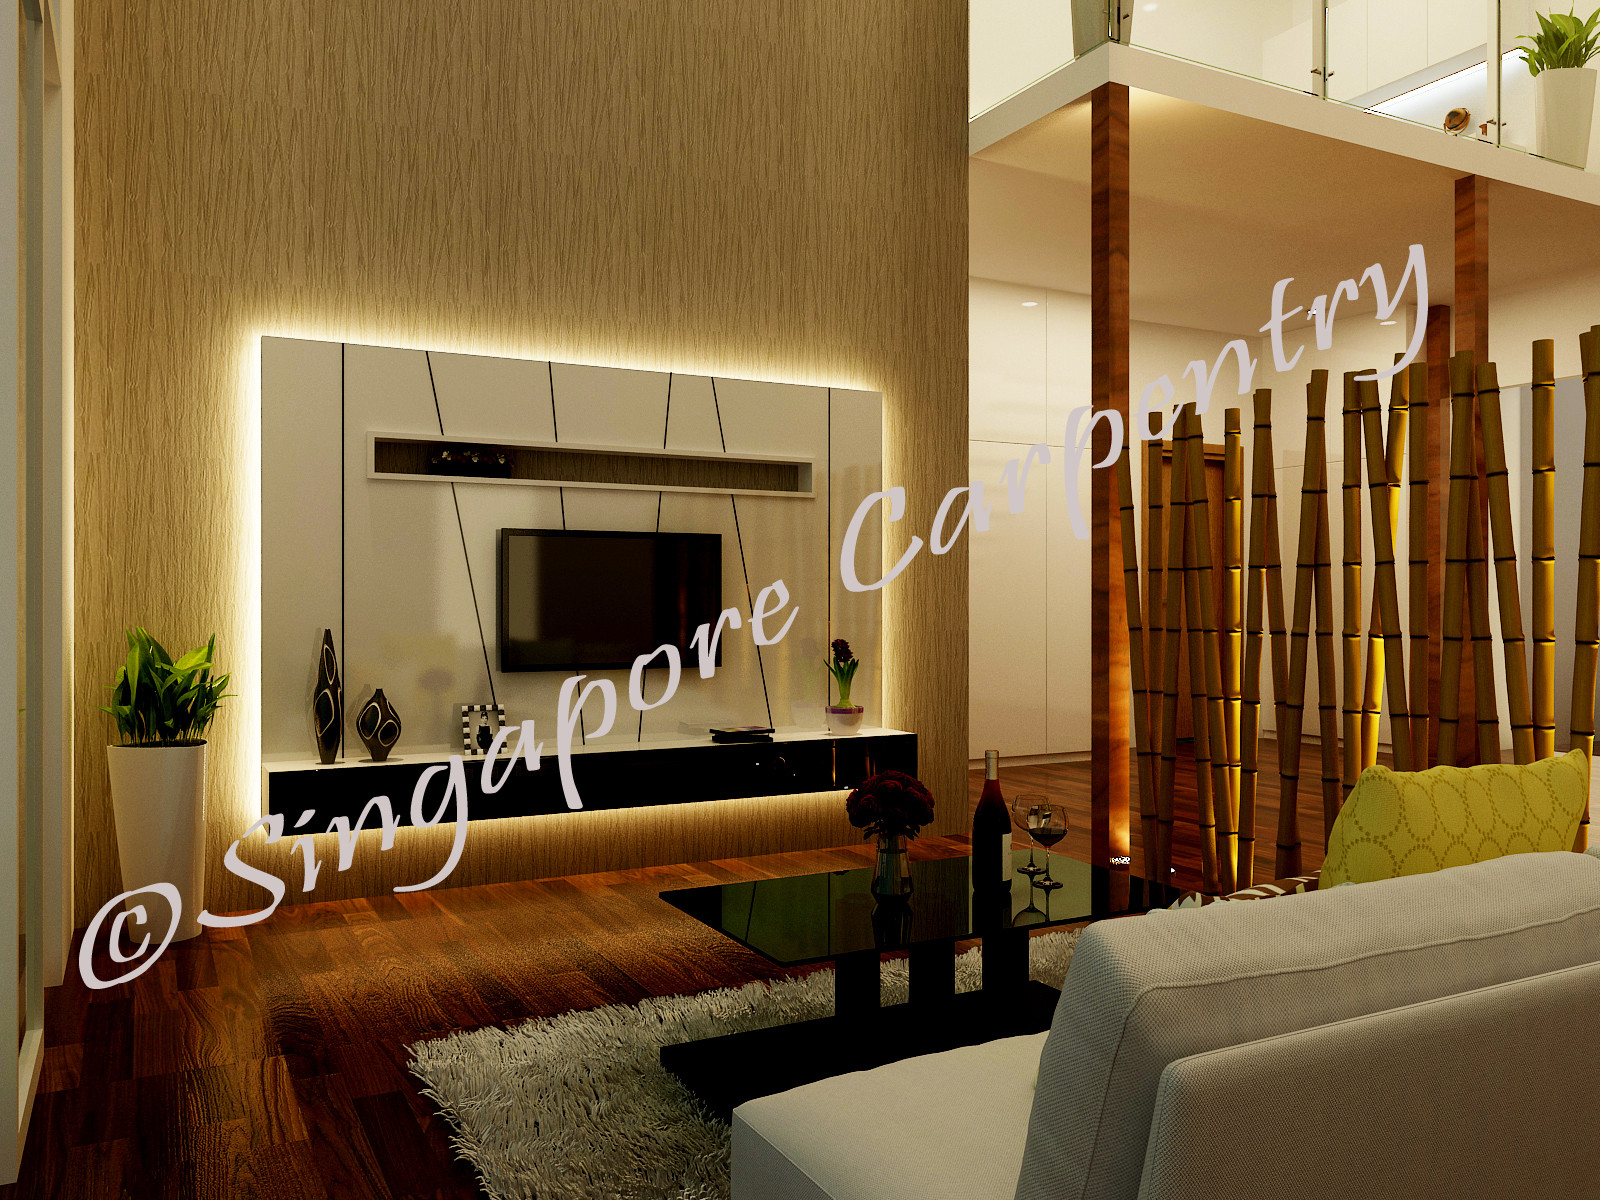 Wall Words For Living Room
 Singapore Carpentry